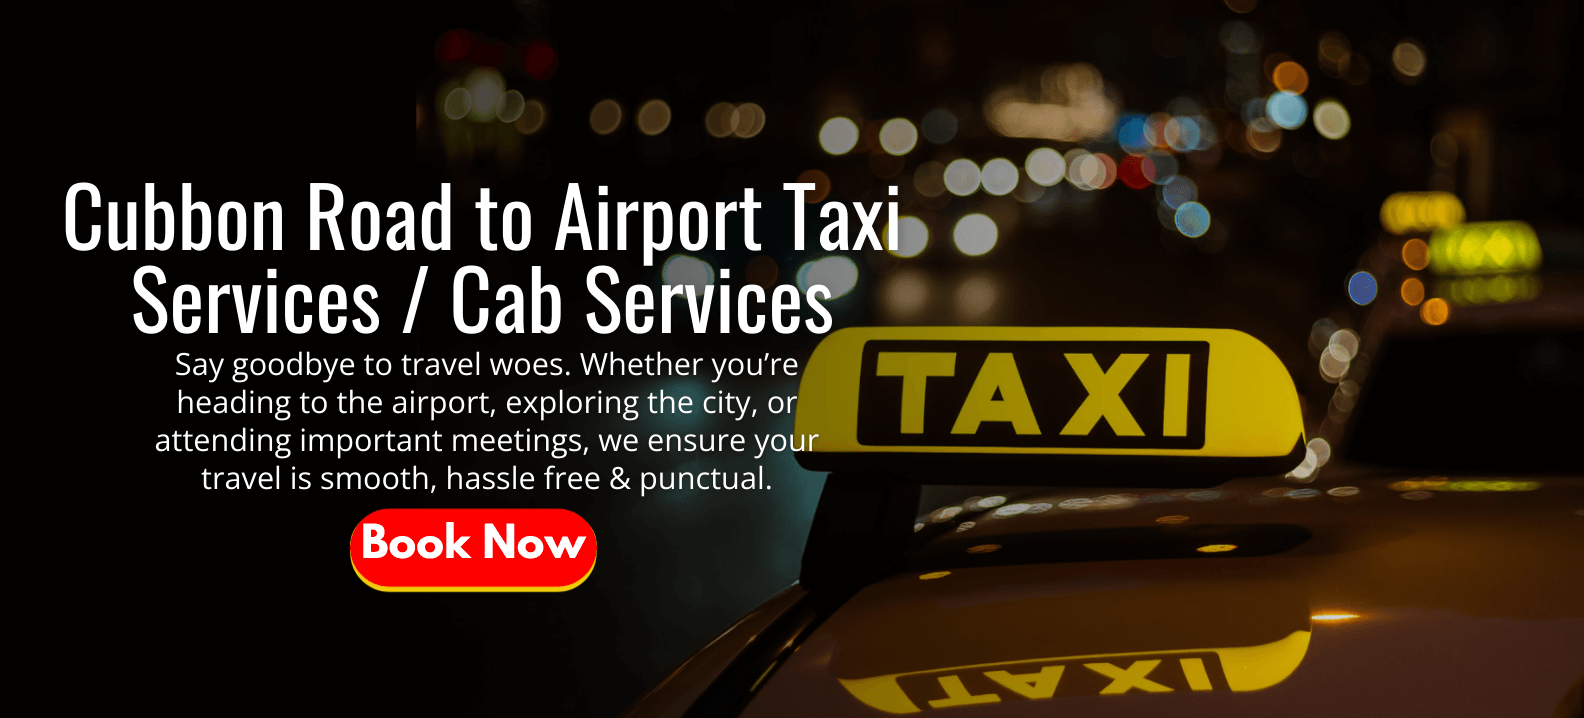 Cubbon Road to Airport Taxi Services _ Cab Services